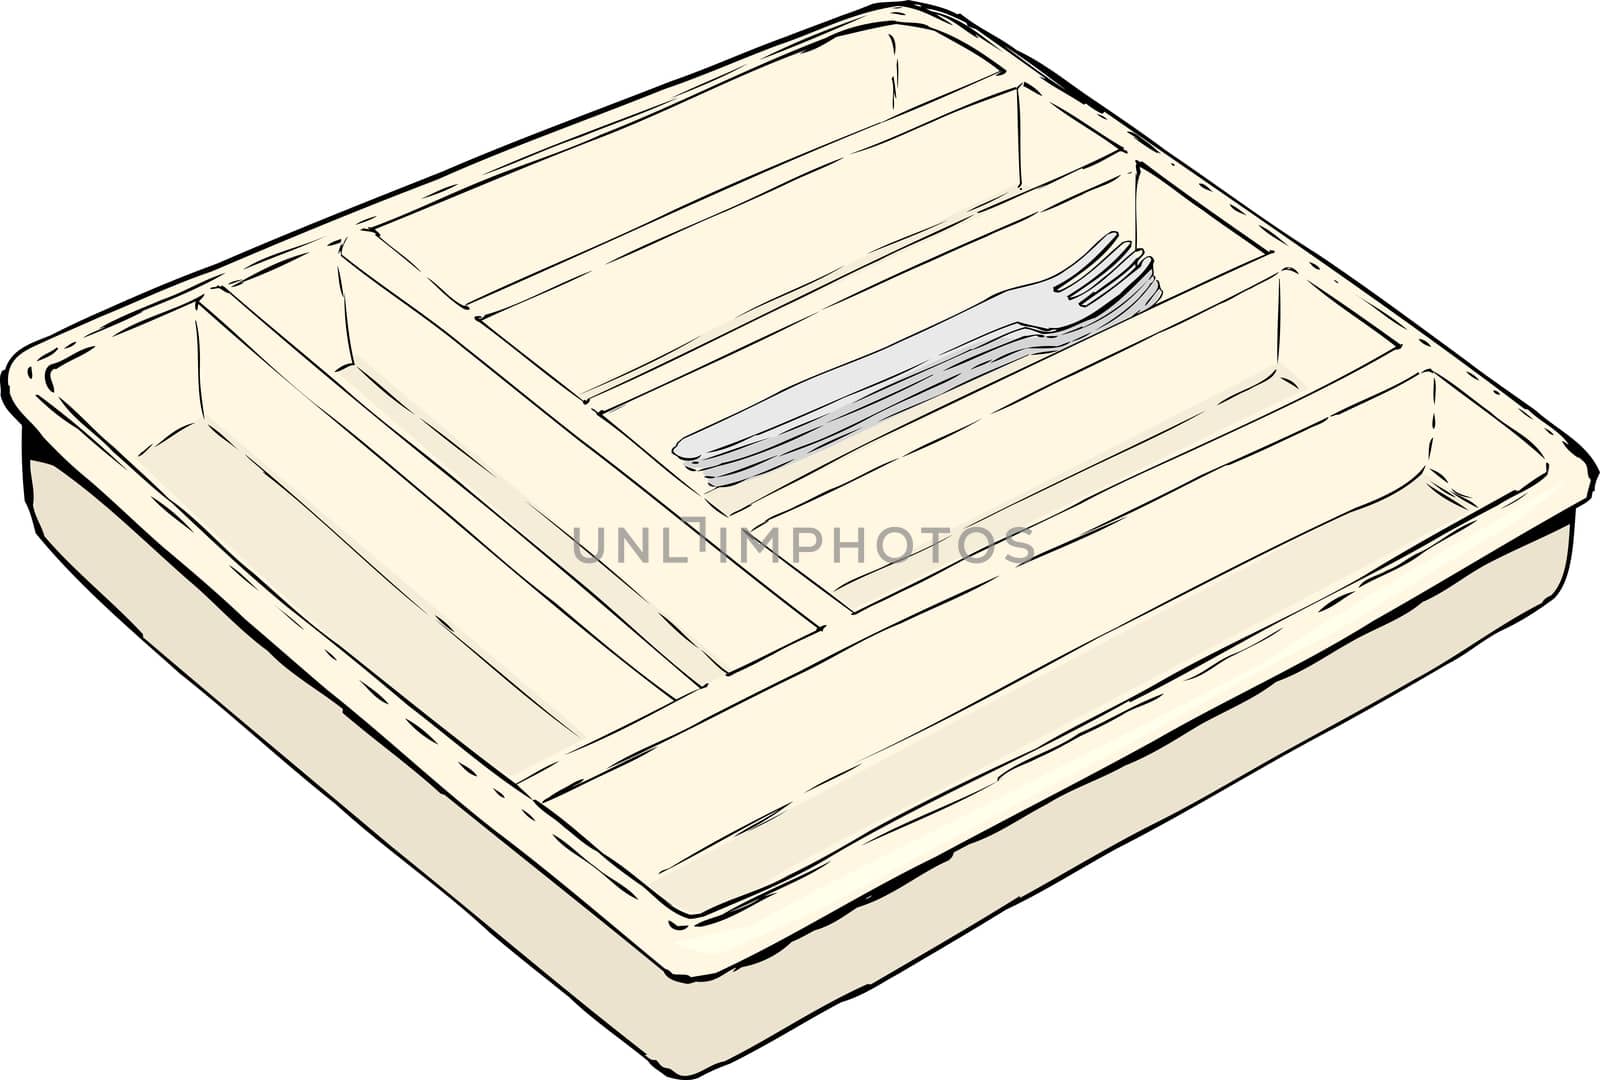 Single tray holding forks by TheBlackRhino